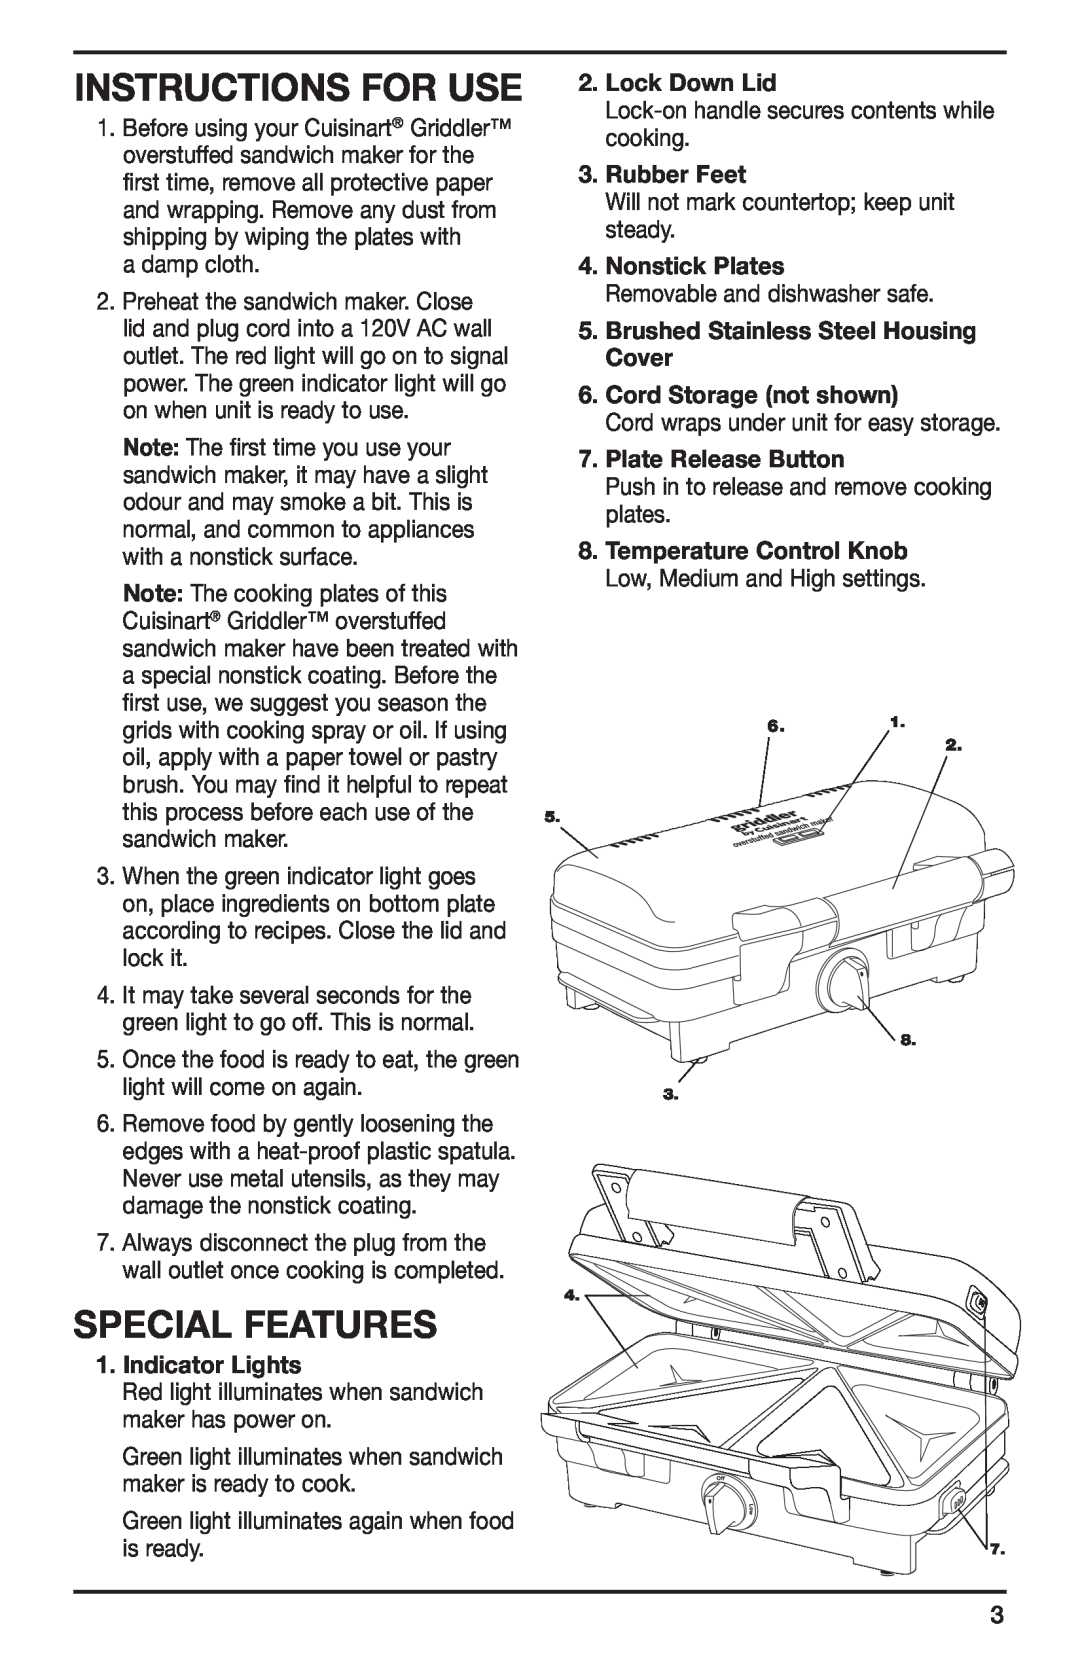 Cuisinart CGR-SMC Special Features, Instructions For Use, Indicator Lights, Lock Down Lid, Rubber Feet, Nonstick Plates 